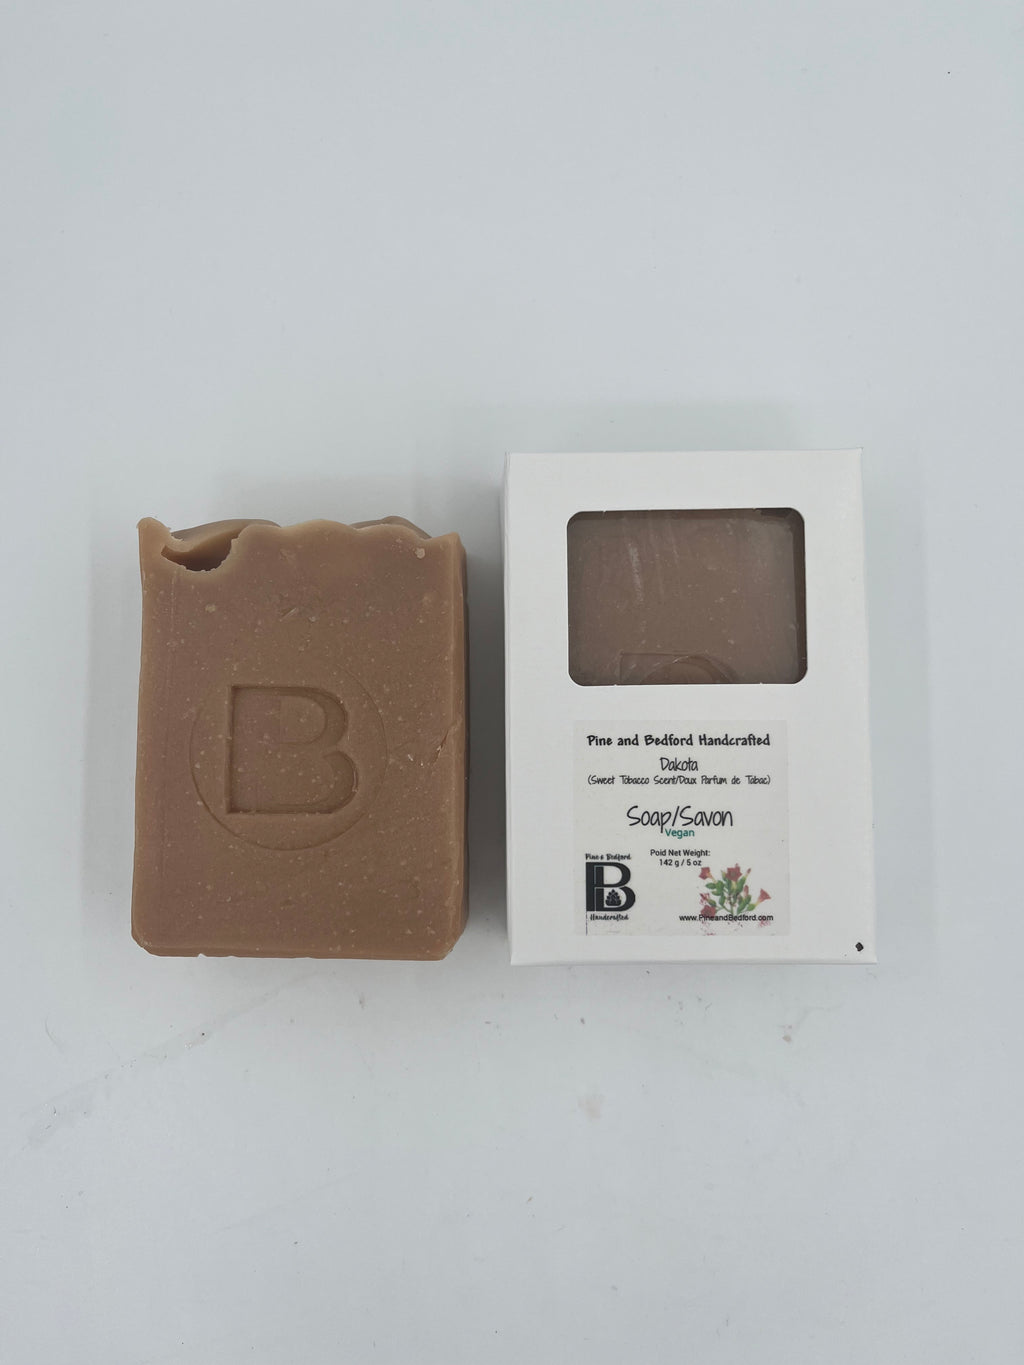 Pine and Bedford's Dakota Soap Bars have a Wonderfully earthy scent of sweet tobacco flower, orange, vanilla and amber.  They are equally popular with men and women. Made from our Extra Bubbles Formula, there is enough creamy bubbles with which to shave. Shown here naked and boxed.